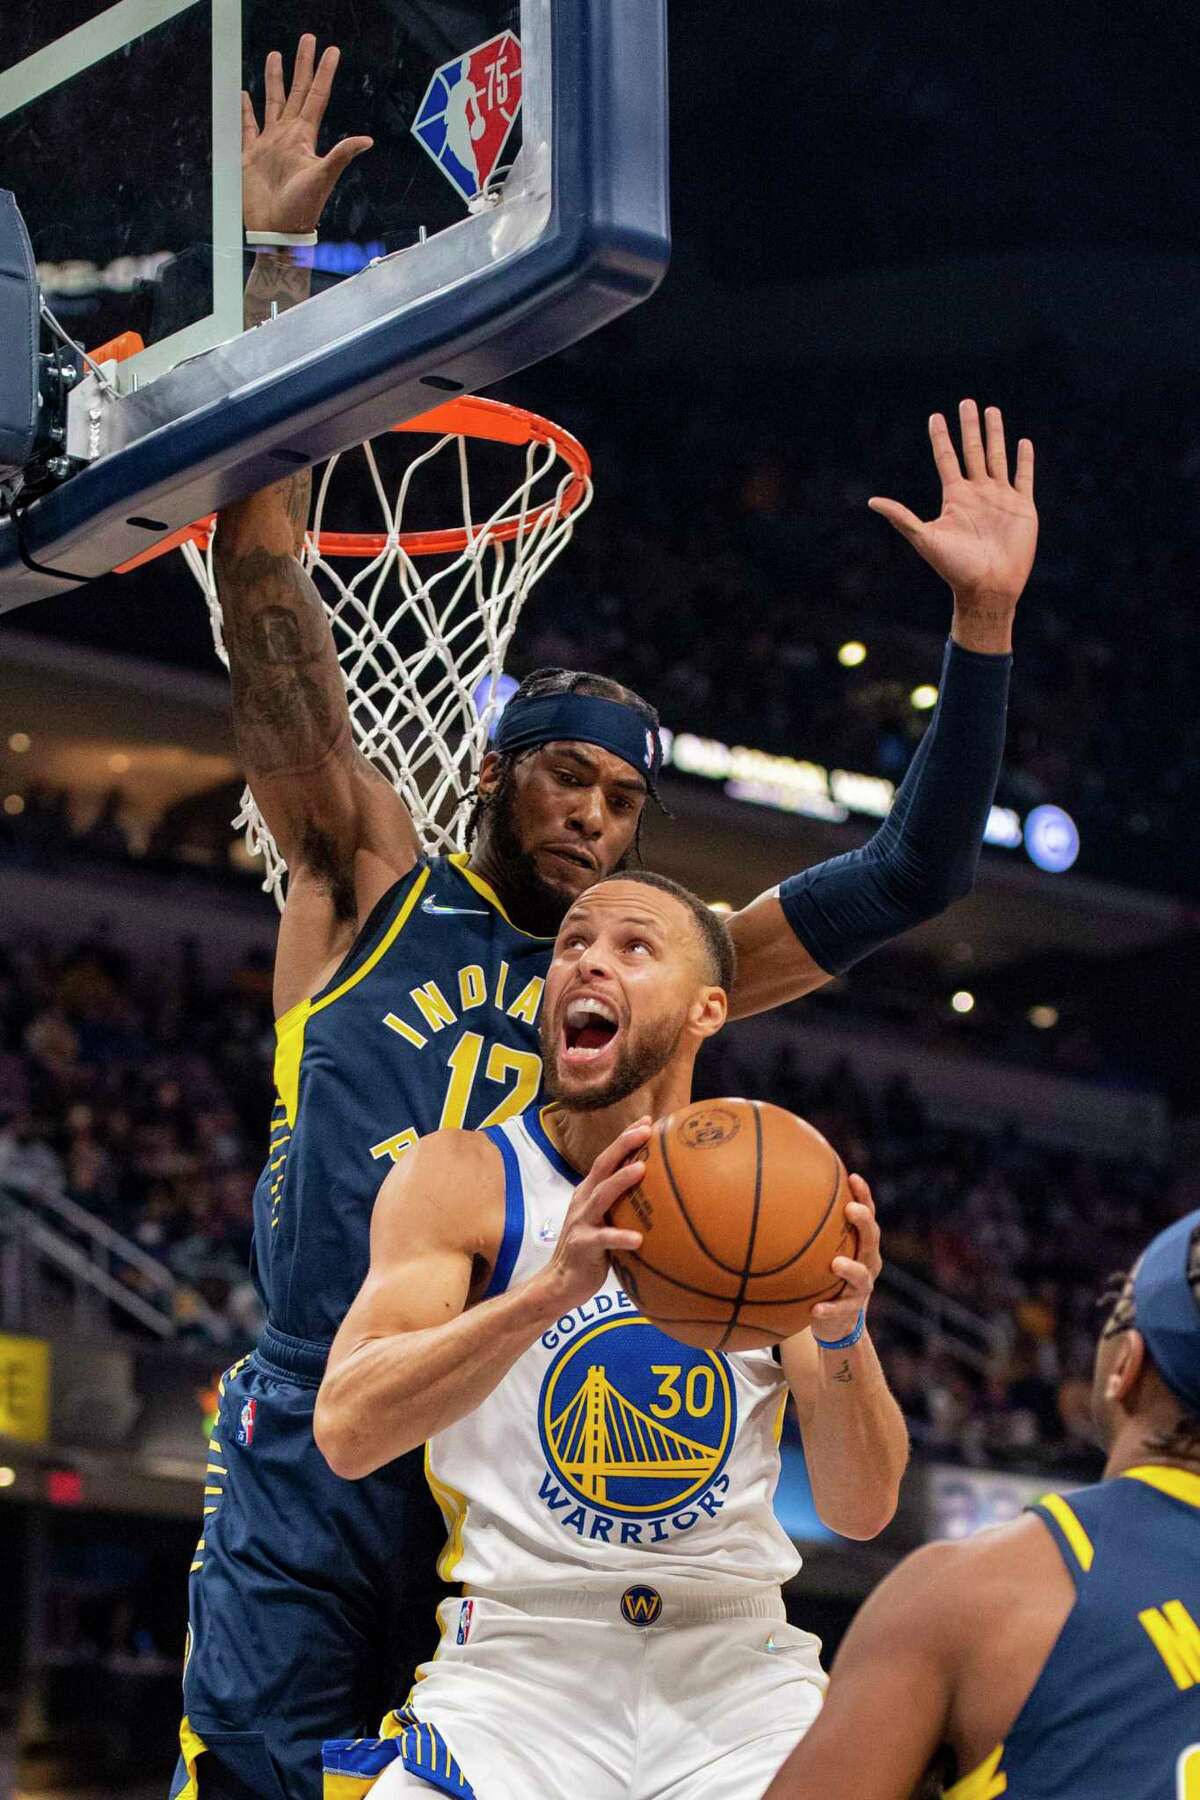 Indiana Pacers forward Oshae Brissett (12) works to stop a scoring effort by Golden State Warriors guard Stephen Curry (30) during the first half of an NBA basketball game in Indianapolis, Monday, Dec. 13, 2021. (AP Photo/Doug McSchooler)